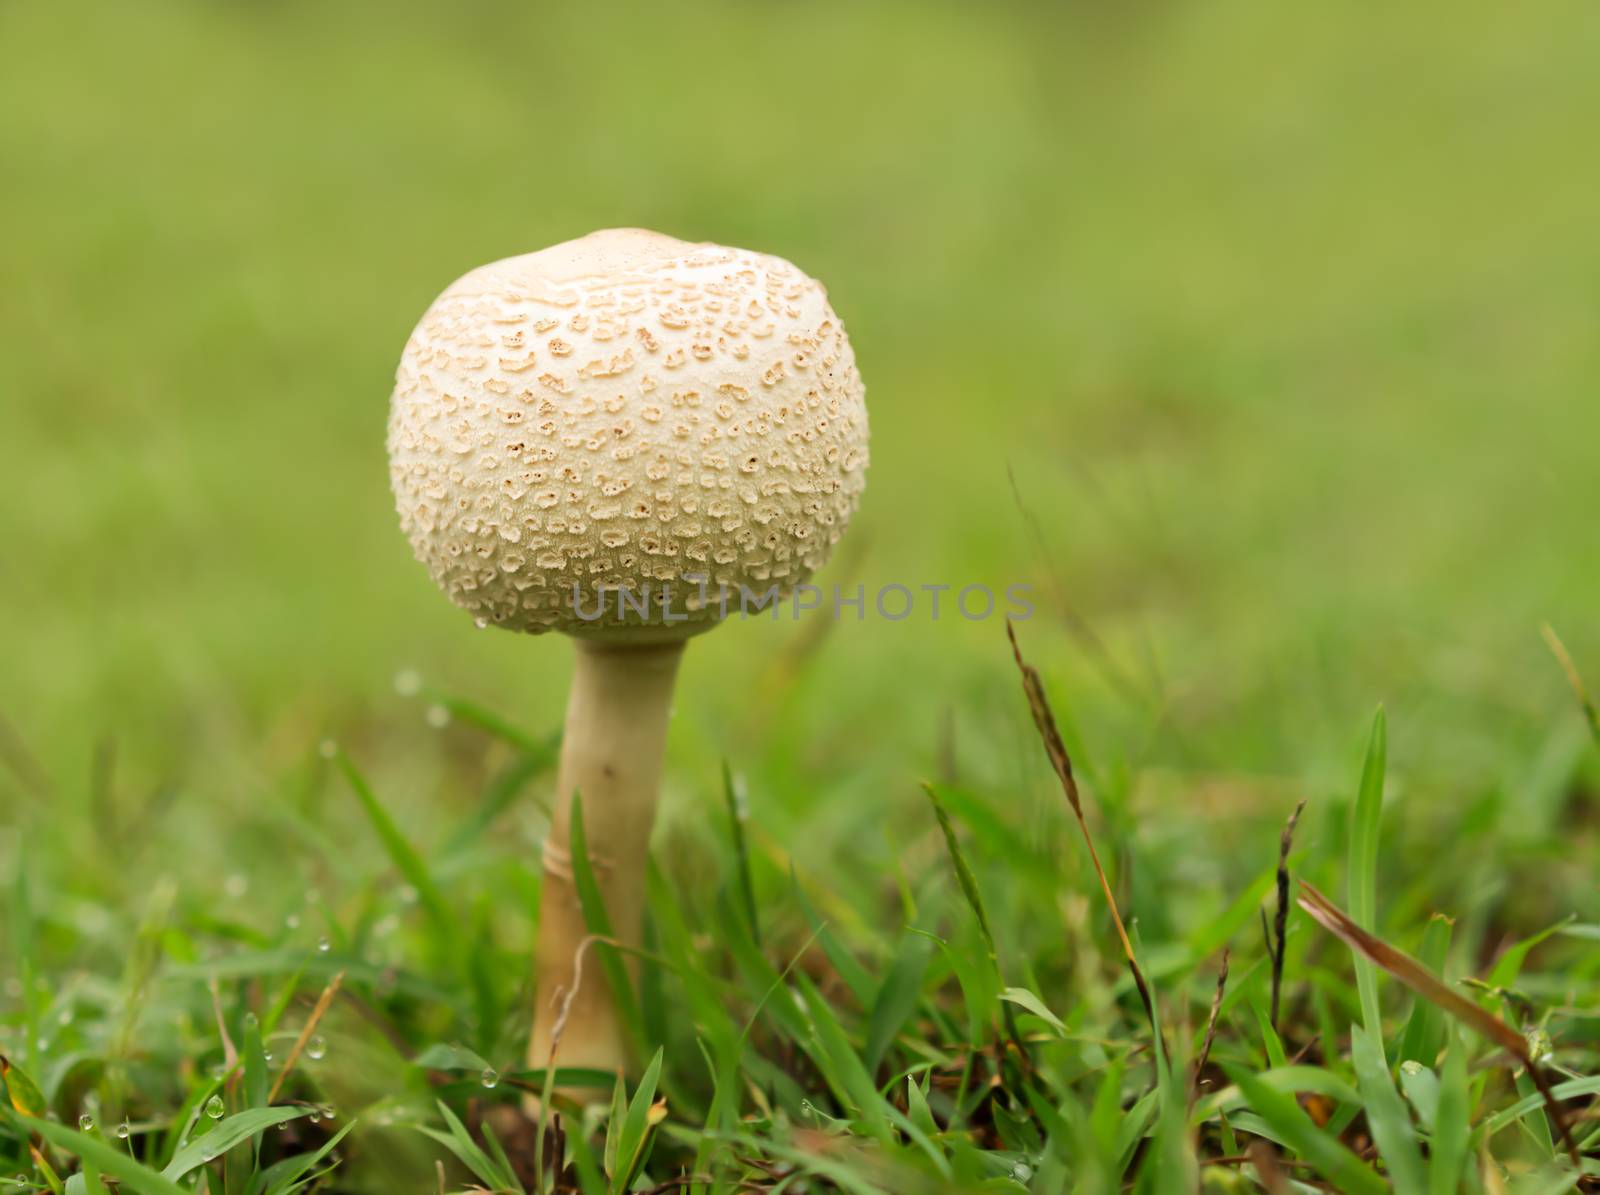 Young Mushroom in Wet Grass  by sherj